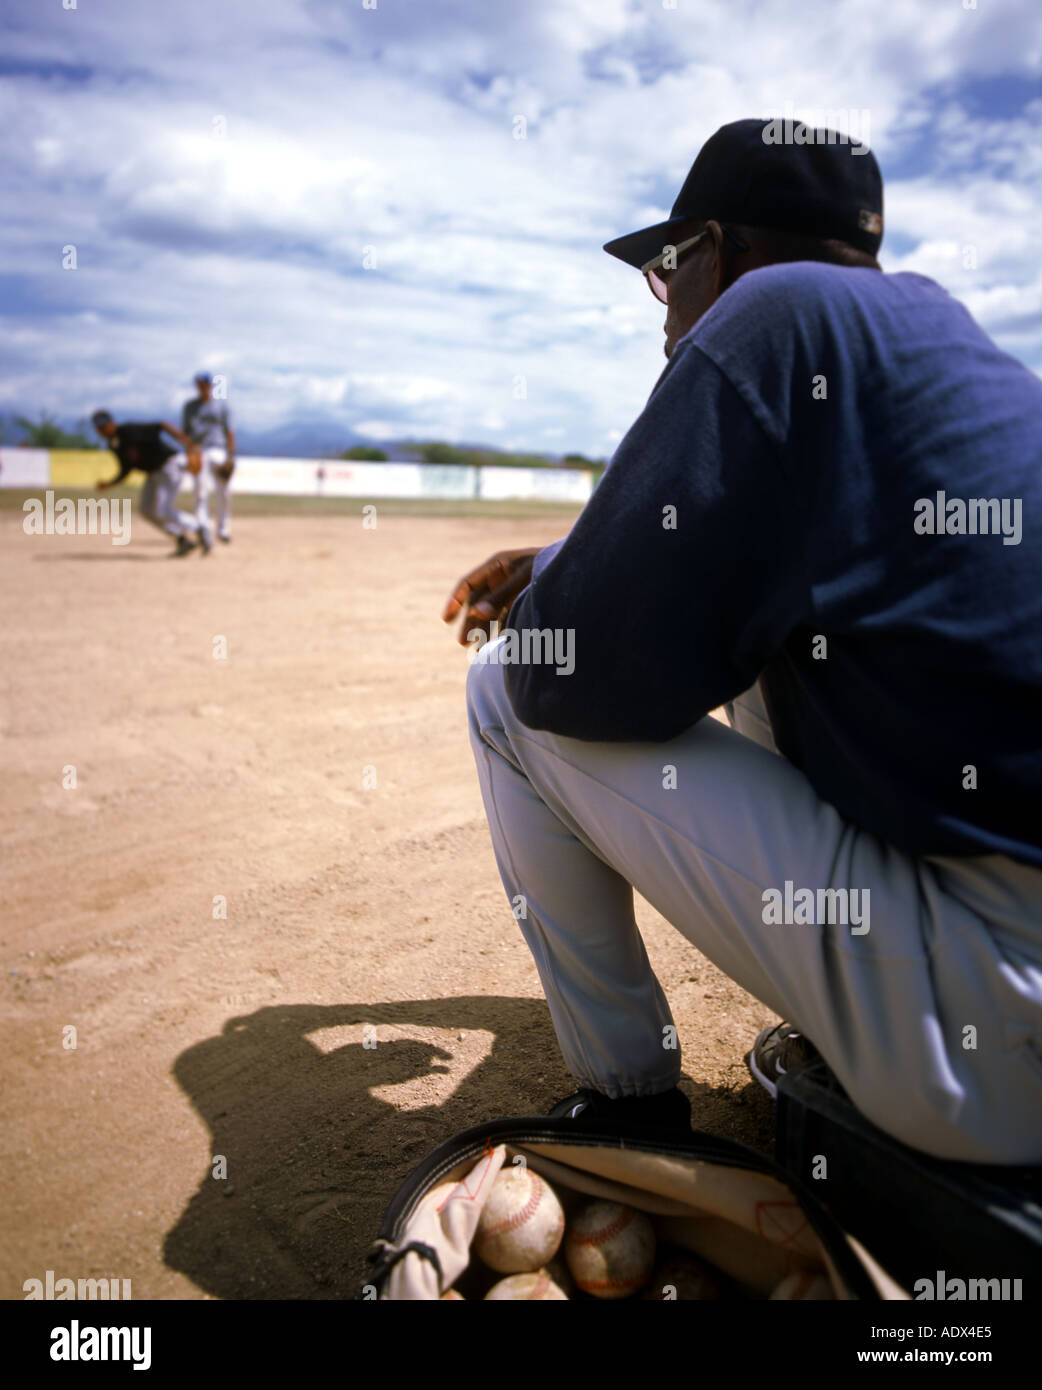 Young boys take fielding practice under the watchfull eye of their baseball coach at a school in Bani Dominican Republic  Stock Photo